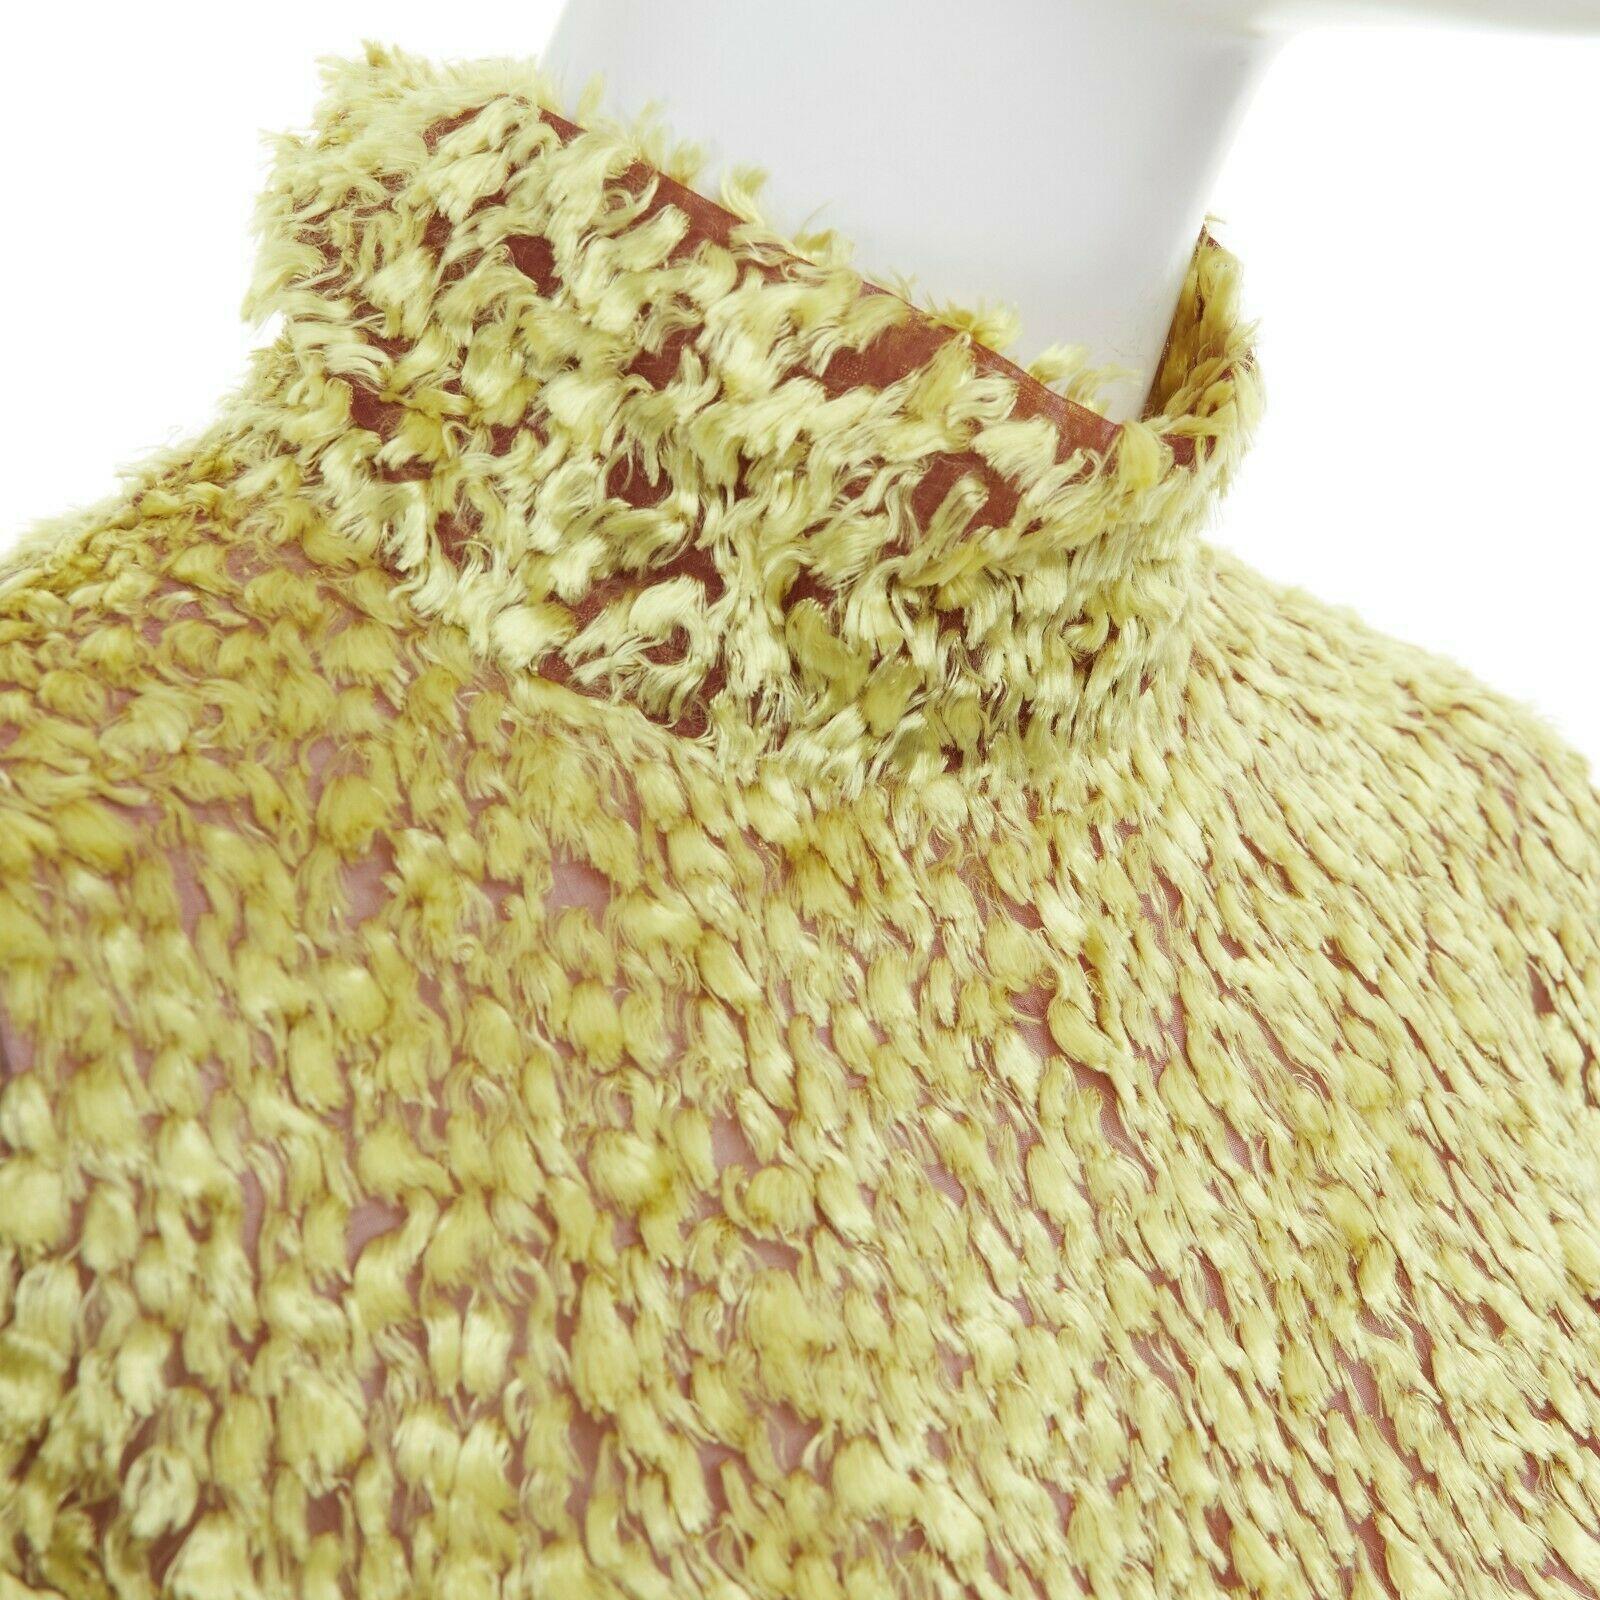 CELINE PHOEBE PHILO yellow fluffy yarn embellished mock neck top FR40 M

CELINE BY PHOEBE PHILO
Viscose, silk. Golden yellow fluffy thread embroidery throughout. Brown mesh lining. Mock collar. Long sleeves. Concealed zip back closure. Made in